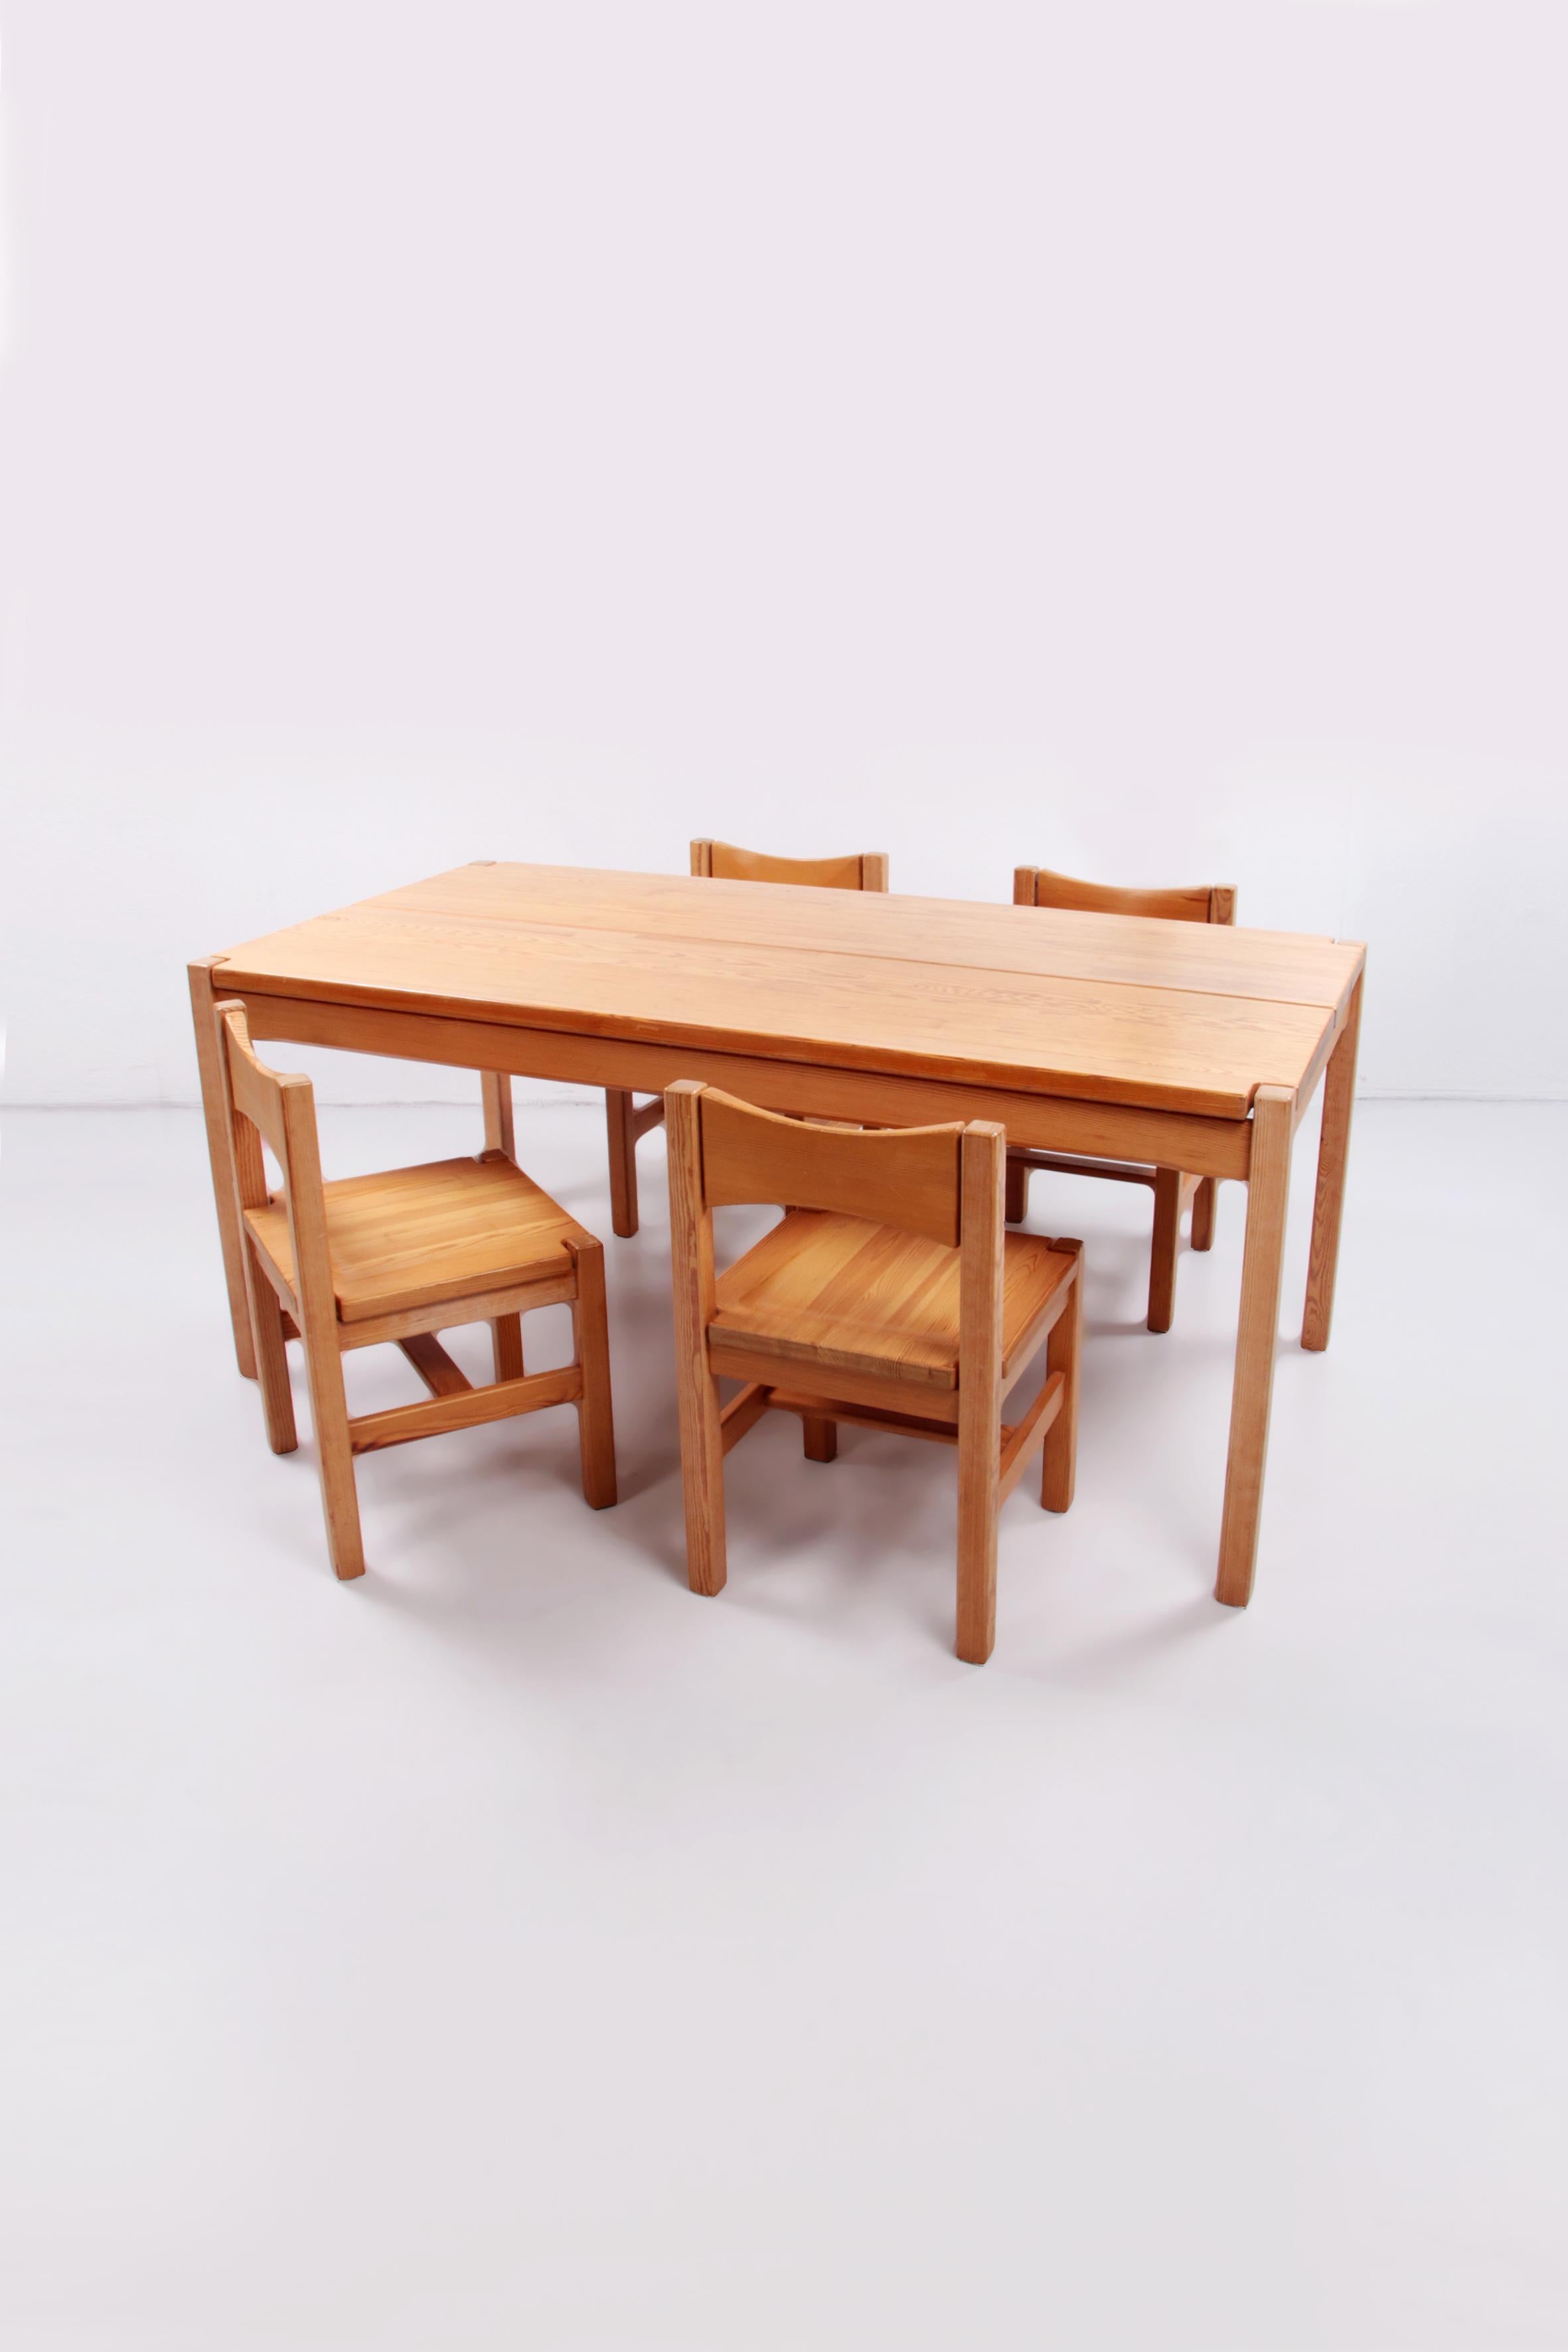 Mid-Century Modern Ilmari Tapiovaara Dining Table with 4 Chairs for Laukaan Pu, 1963 For Sale